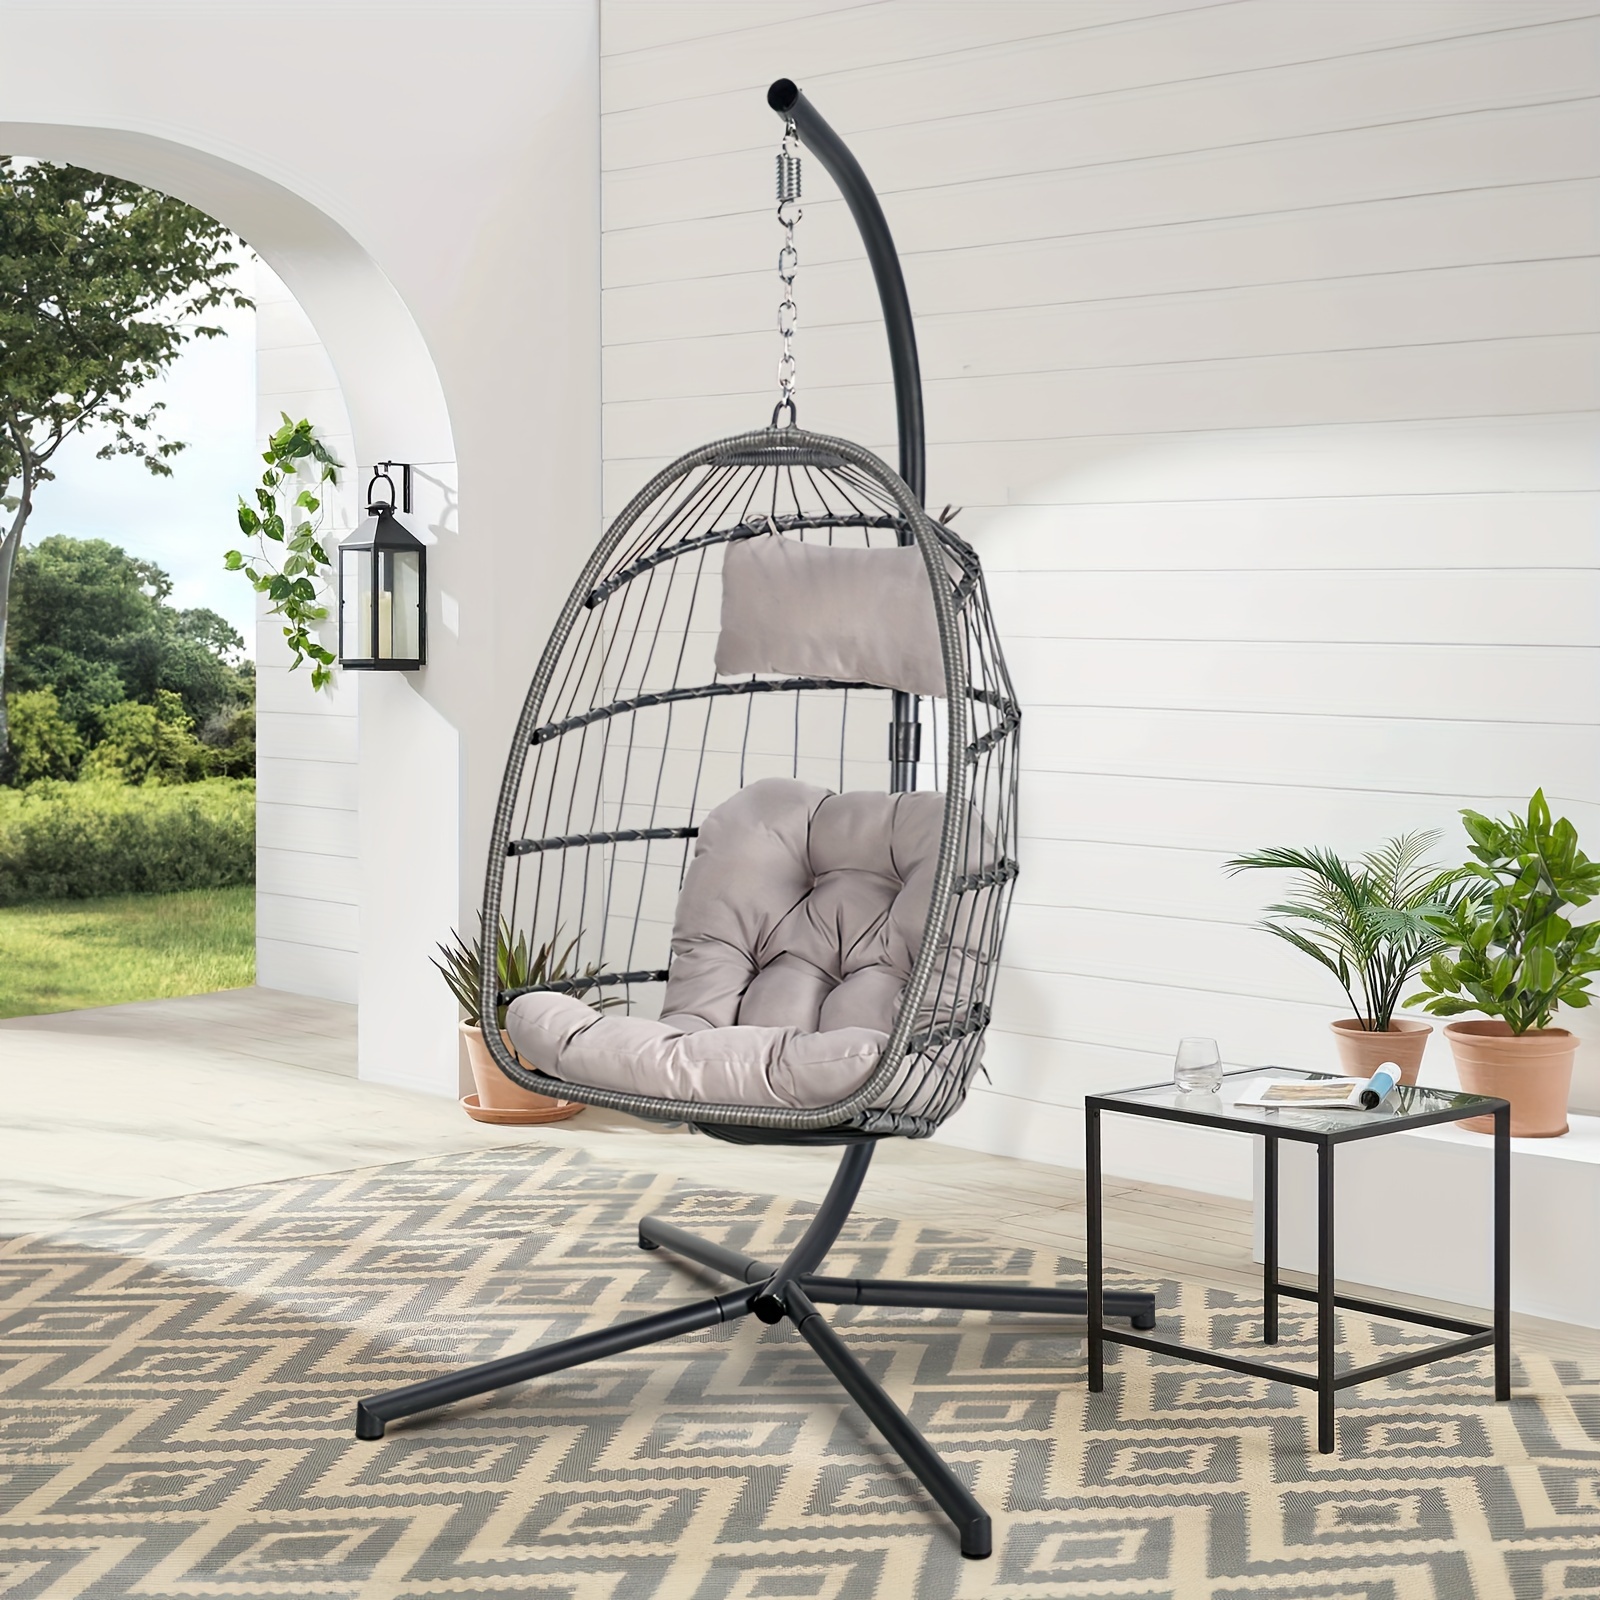 

Outdoor Hanging Egg Swing Chair With Stand, Wicker Hammock Chairs Patio Wicker Swing Egg Chair Indoor Swinging Chair Outdoor Hammock Egg Chair For Patio, Bedroom, Garden And Balcony